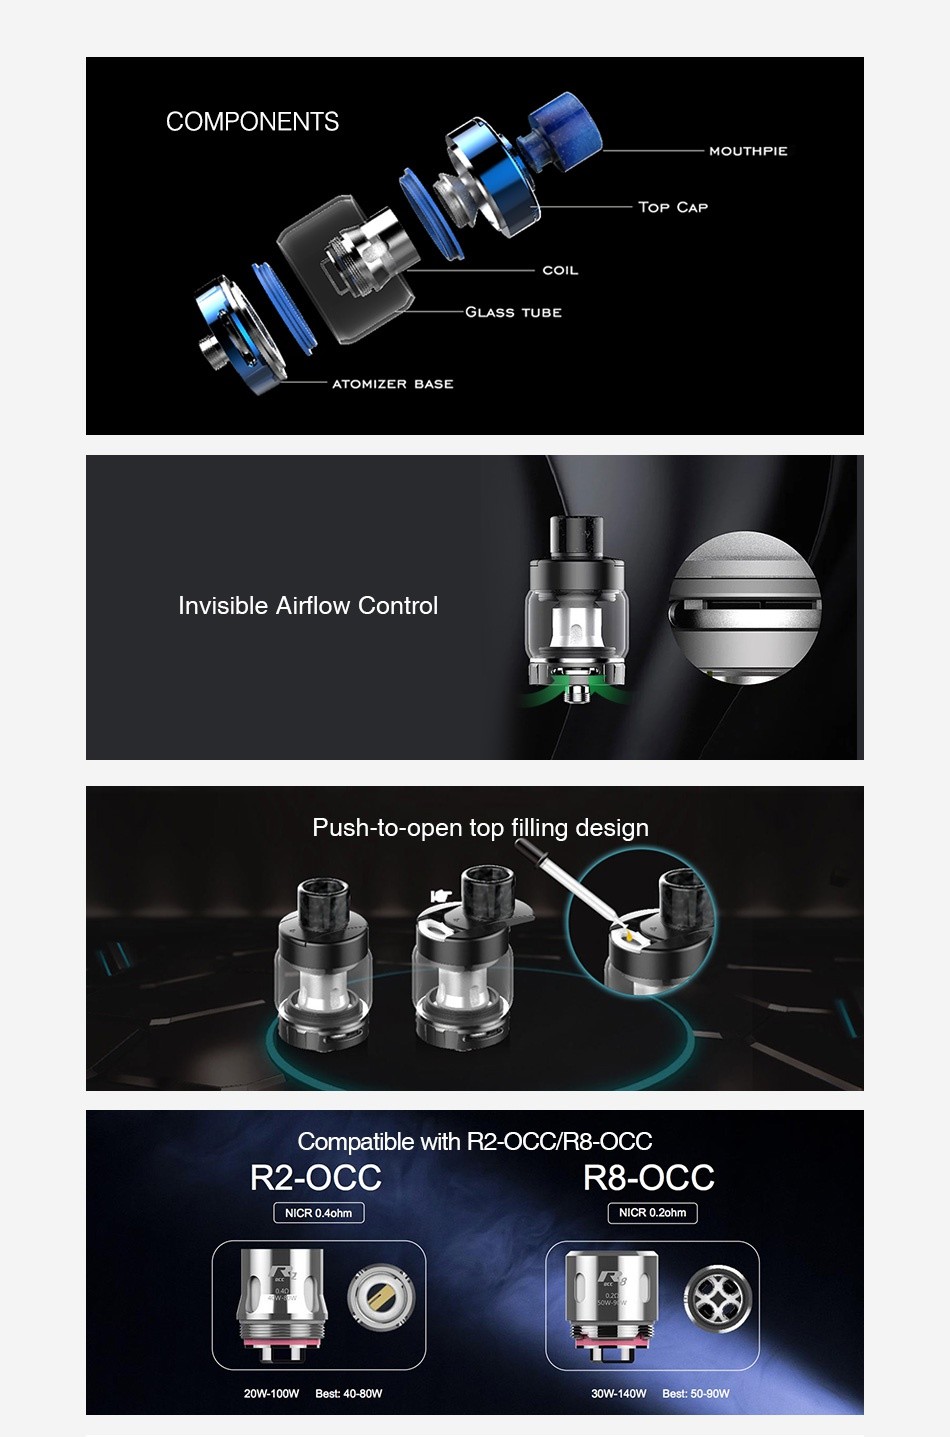 Kangertech XLUM Tank 4.5ml COMPONENTS MOUTHPIE TOP CAP ATOMIZER BASE Invisible airflow Control Push to open top filling design Compatible with R2 OCC R8 OCC R2 OCC R8 OCC NICR 0 ohm NICR0 ohm   20W 100w Best  40 80W 30W140 W Best 50 90W